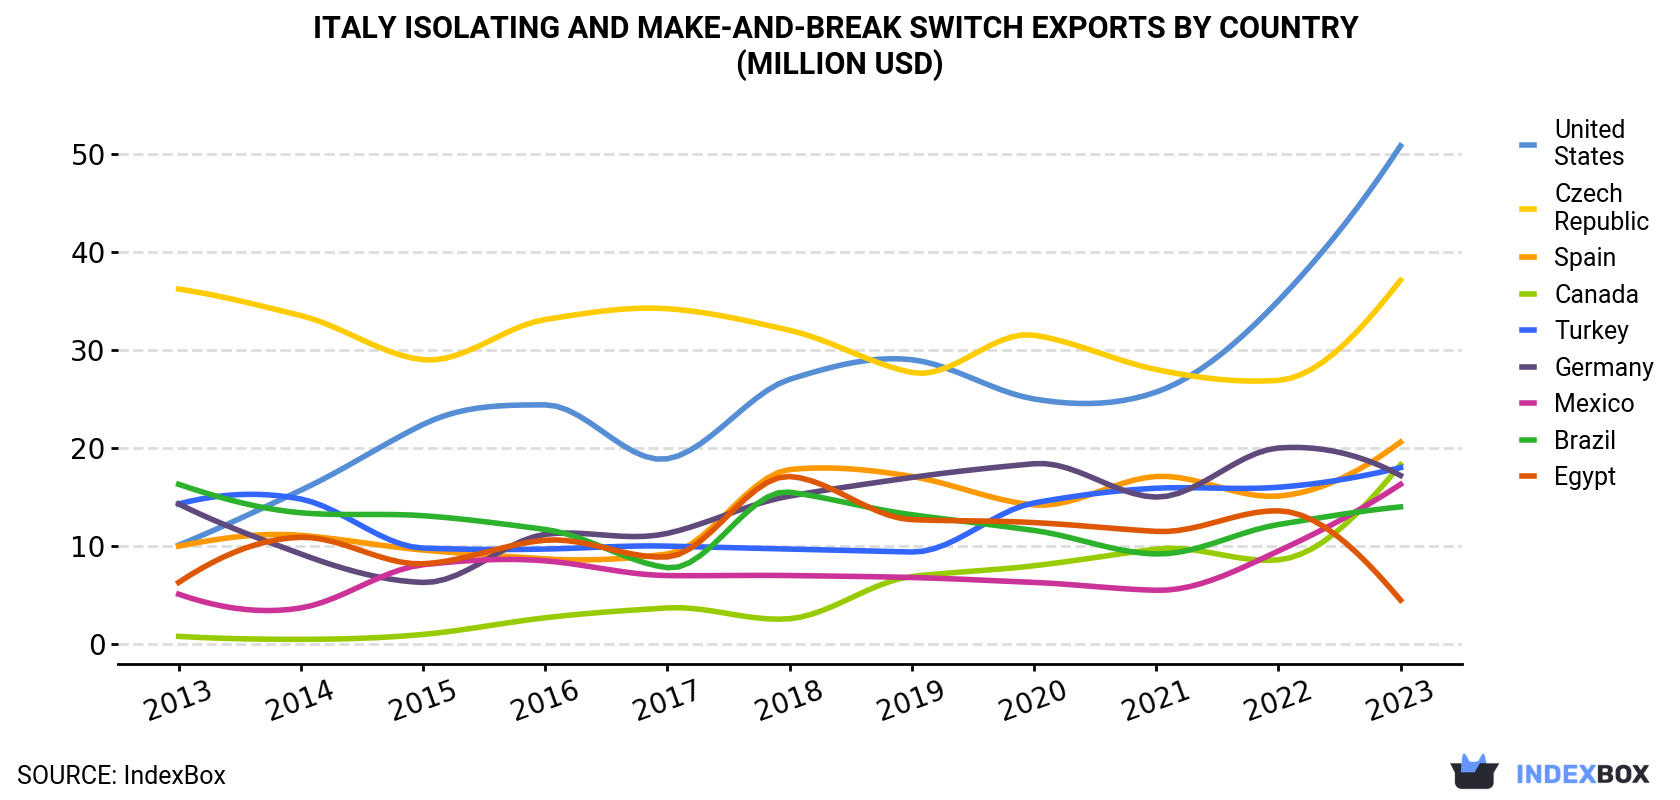 Italy Isolating and Make-and-Break Switch Exports By Country (Million USD)